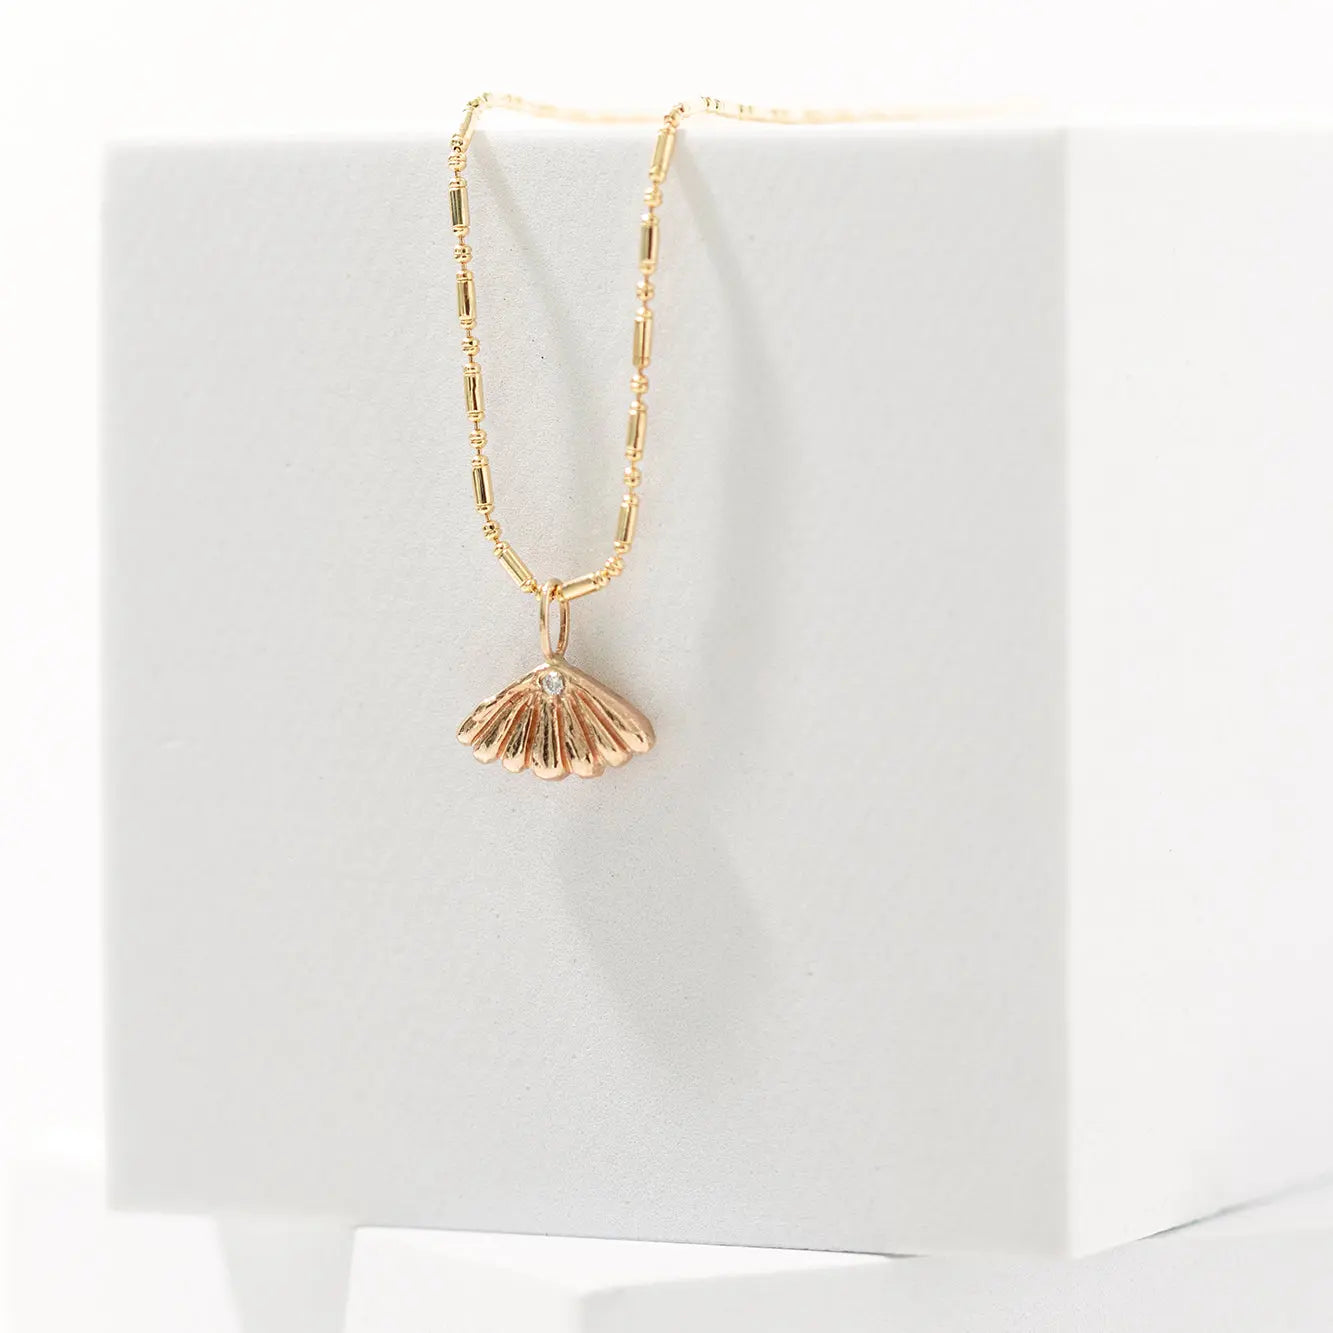 Scallop Shell Necklace Mary Frances Maker